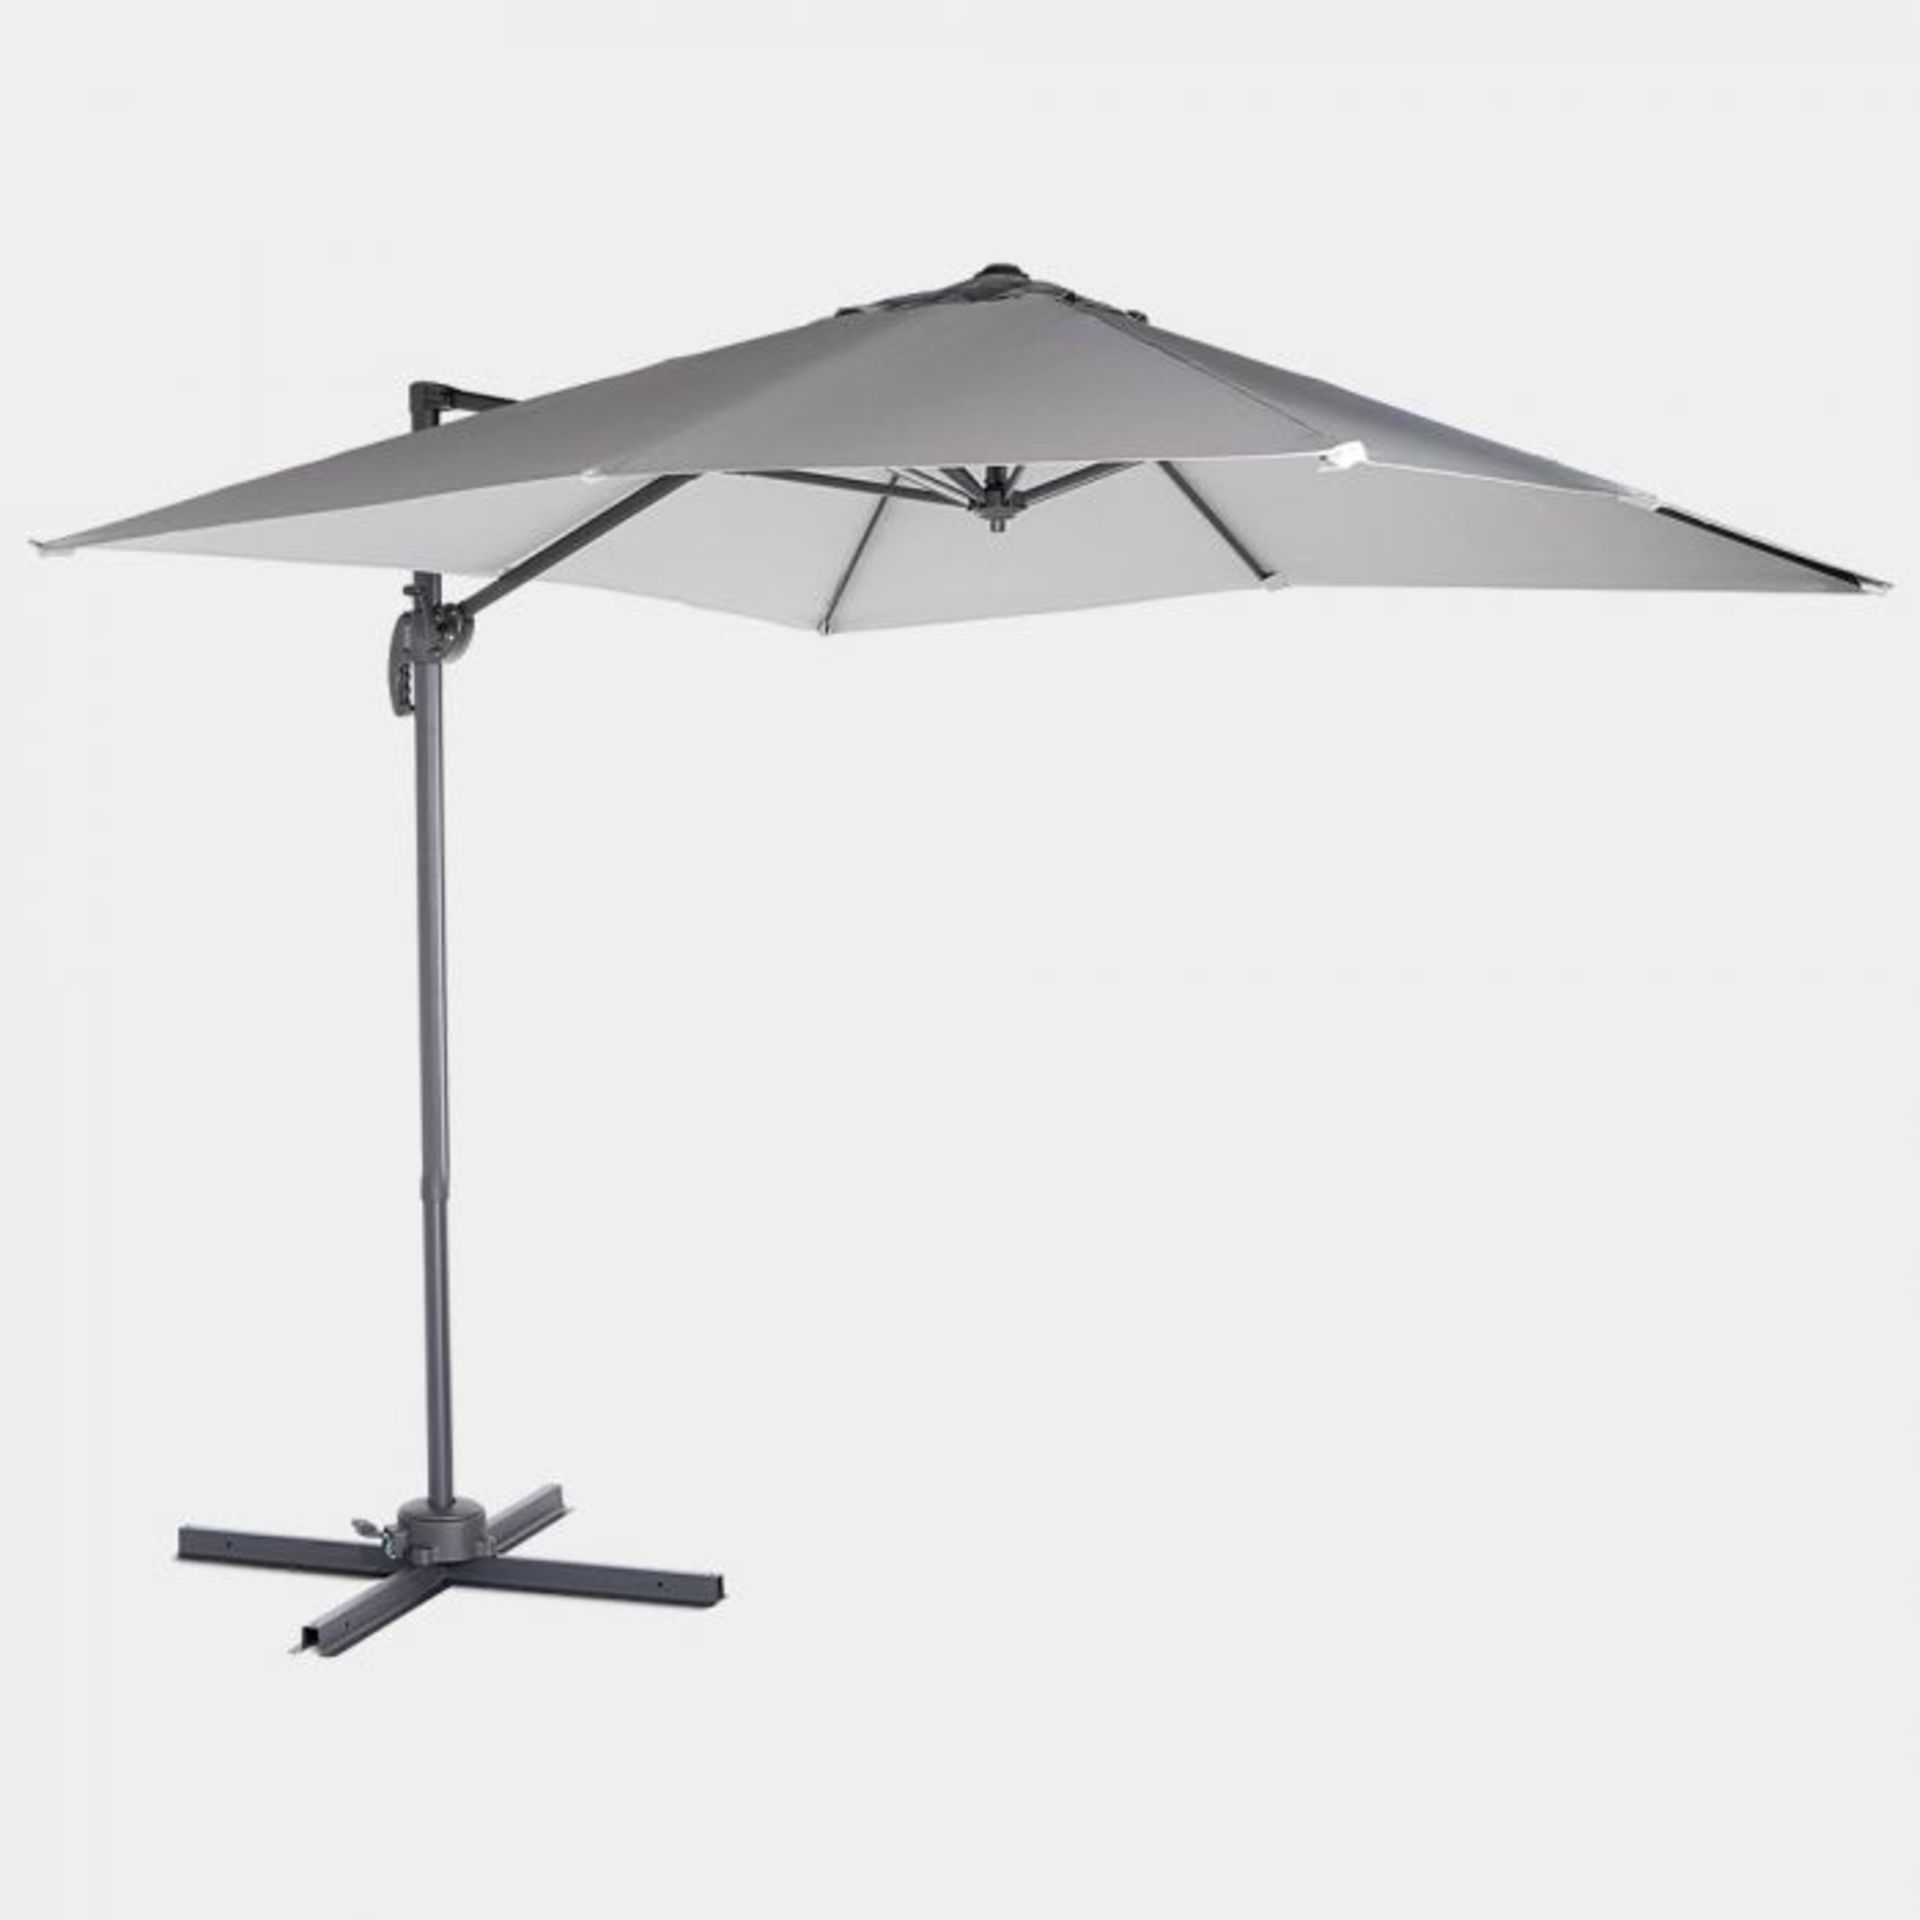 Grey 2.5m Cantilever Overhanging Parasol. Take summer in your stride with a fabulous hanging parasol